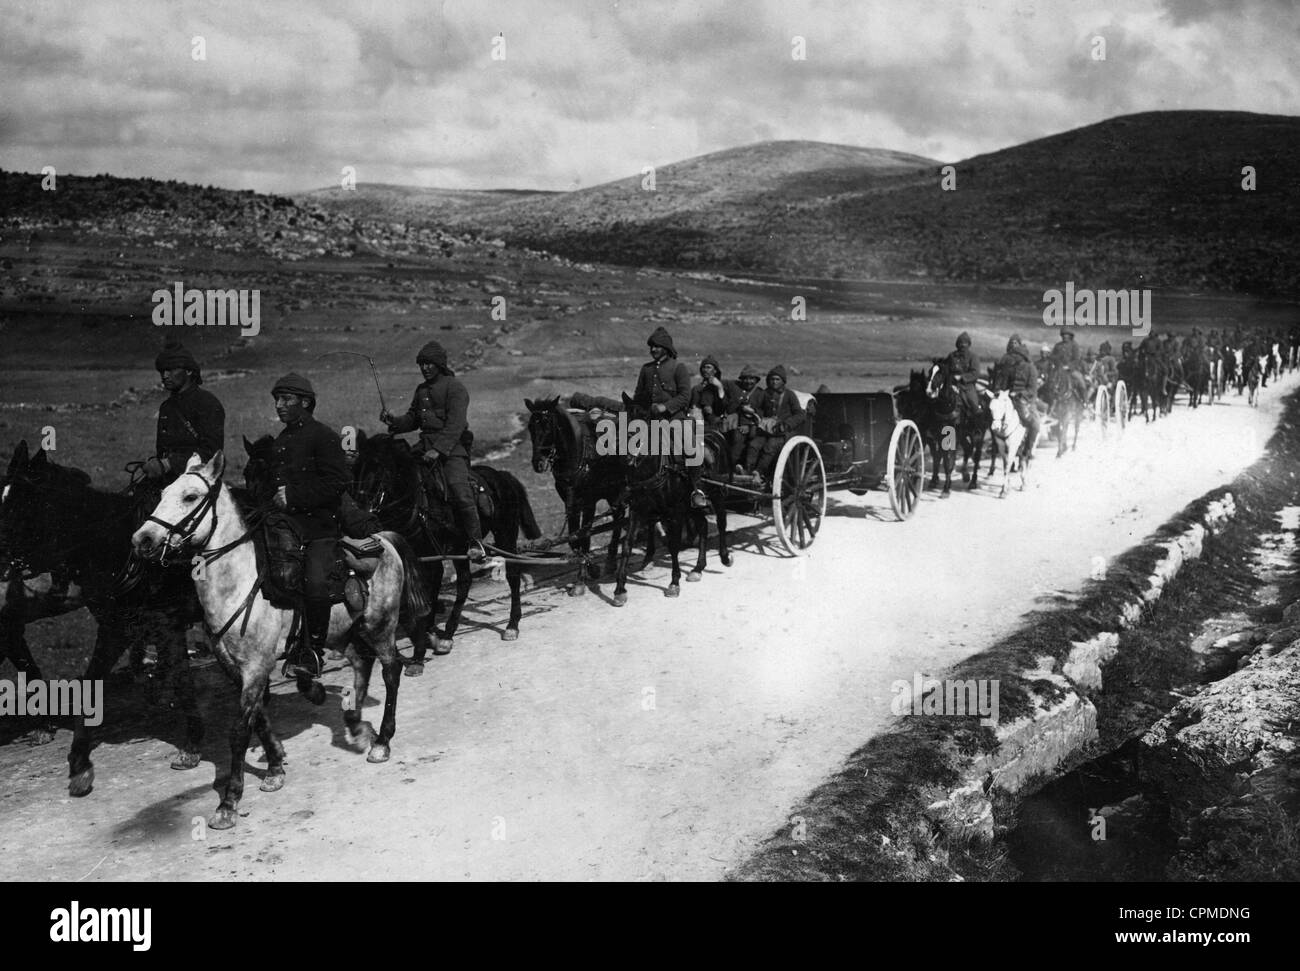 Turkish troops on a road in Syria during the First World War, 1915 Stock Photo